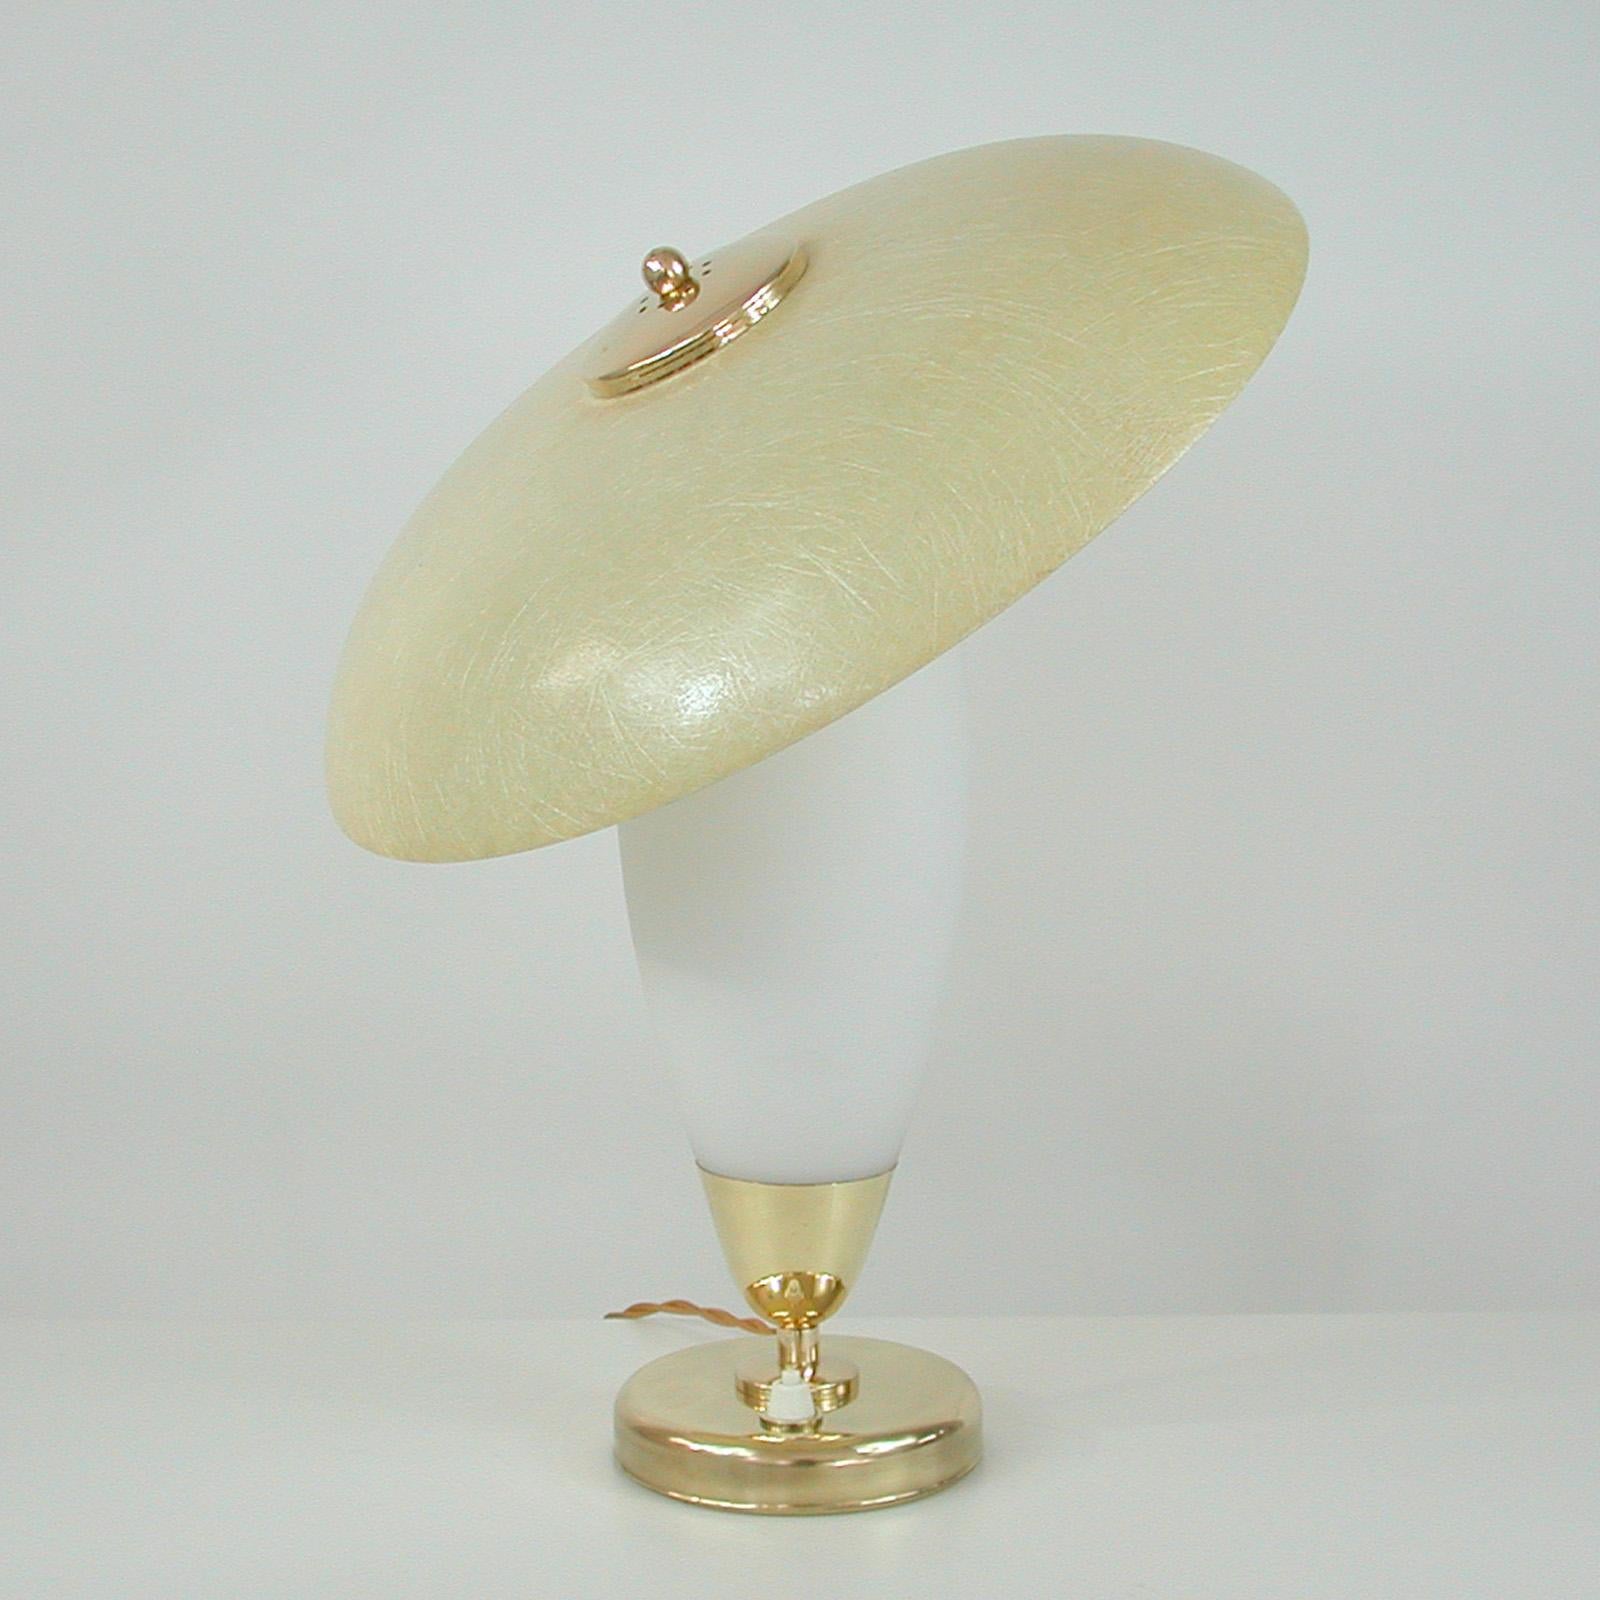 Mid-20th Century Midcentury Swedish Modern Brass, Opaline and Fiberglass Saucer Table Lamp, 1950s For Sale